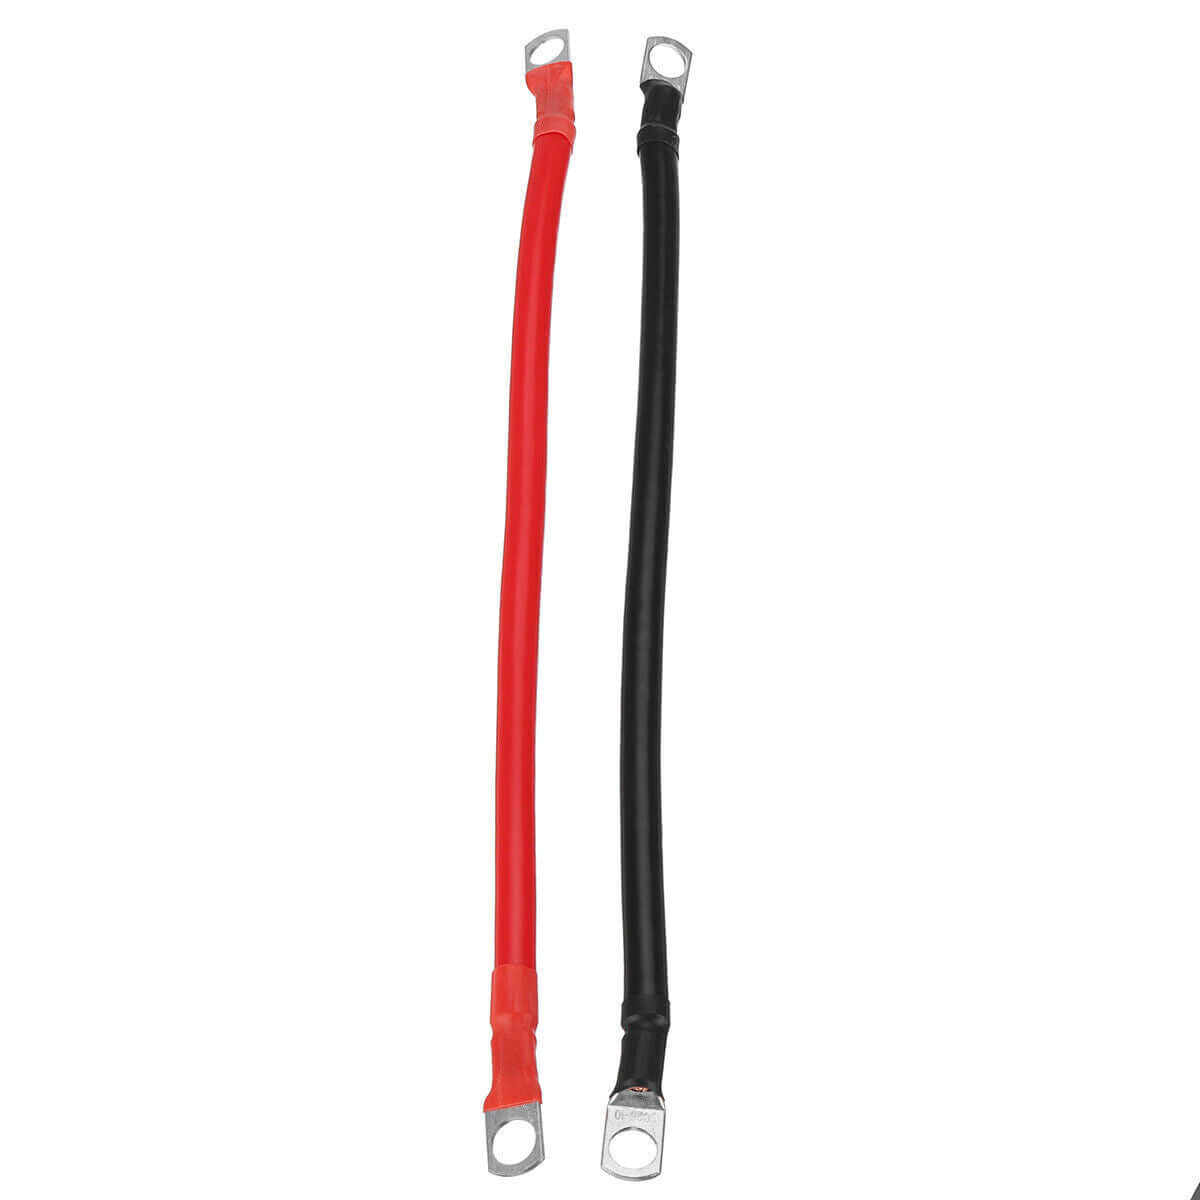 30CM Battery Lead Joiner Connector DC Wire 100A 12V 24V Cable & lugs Red & Black